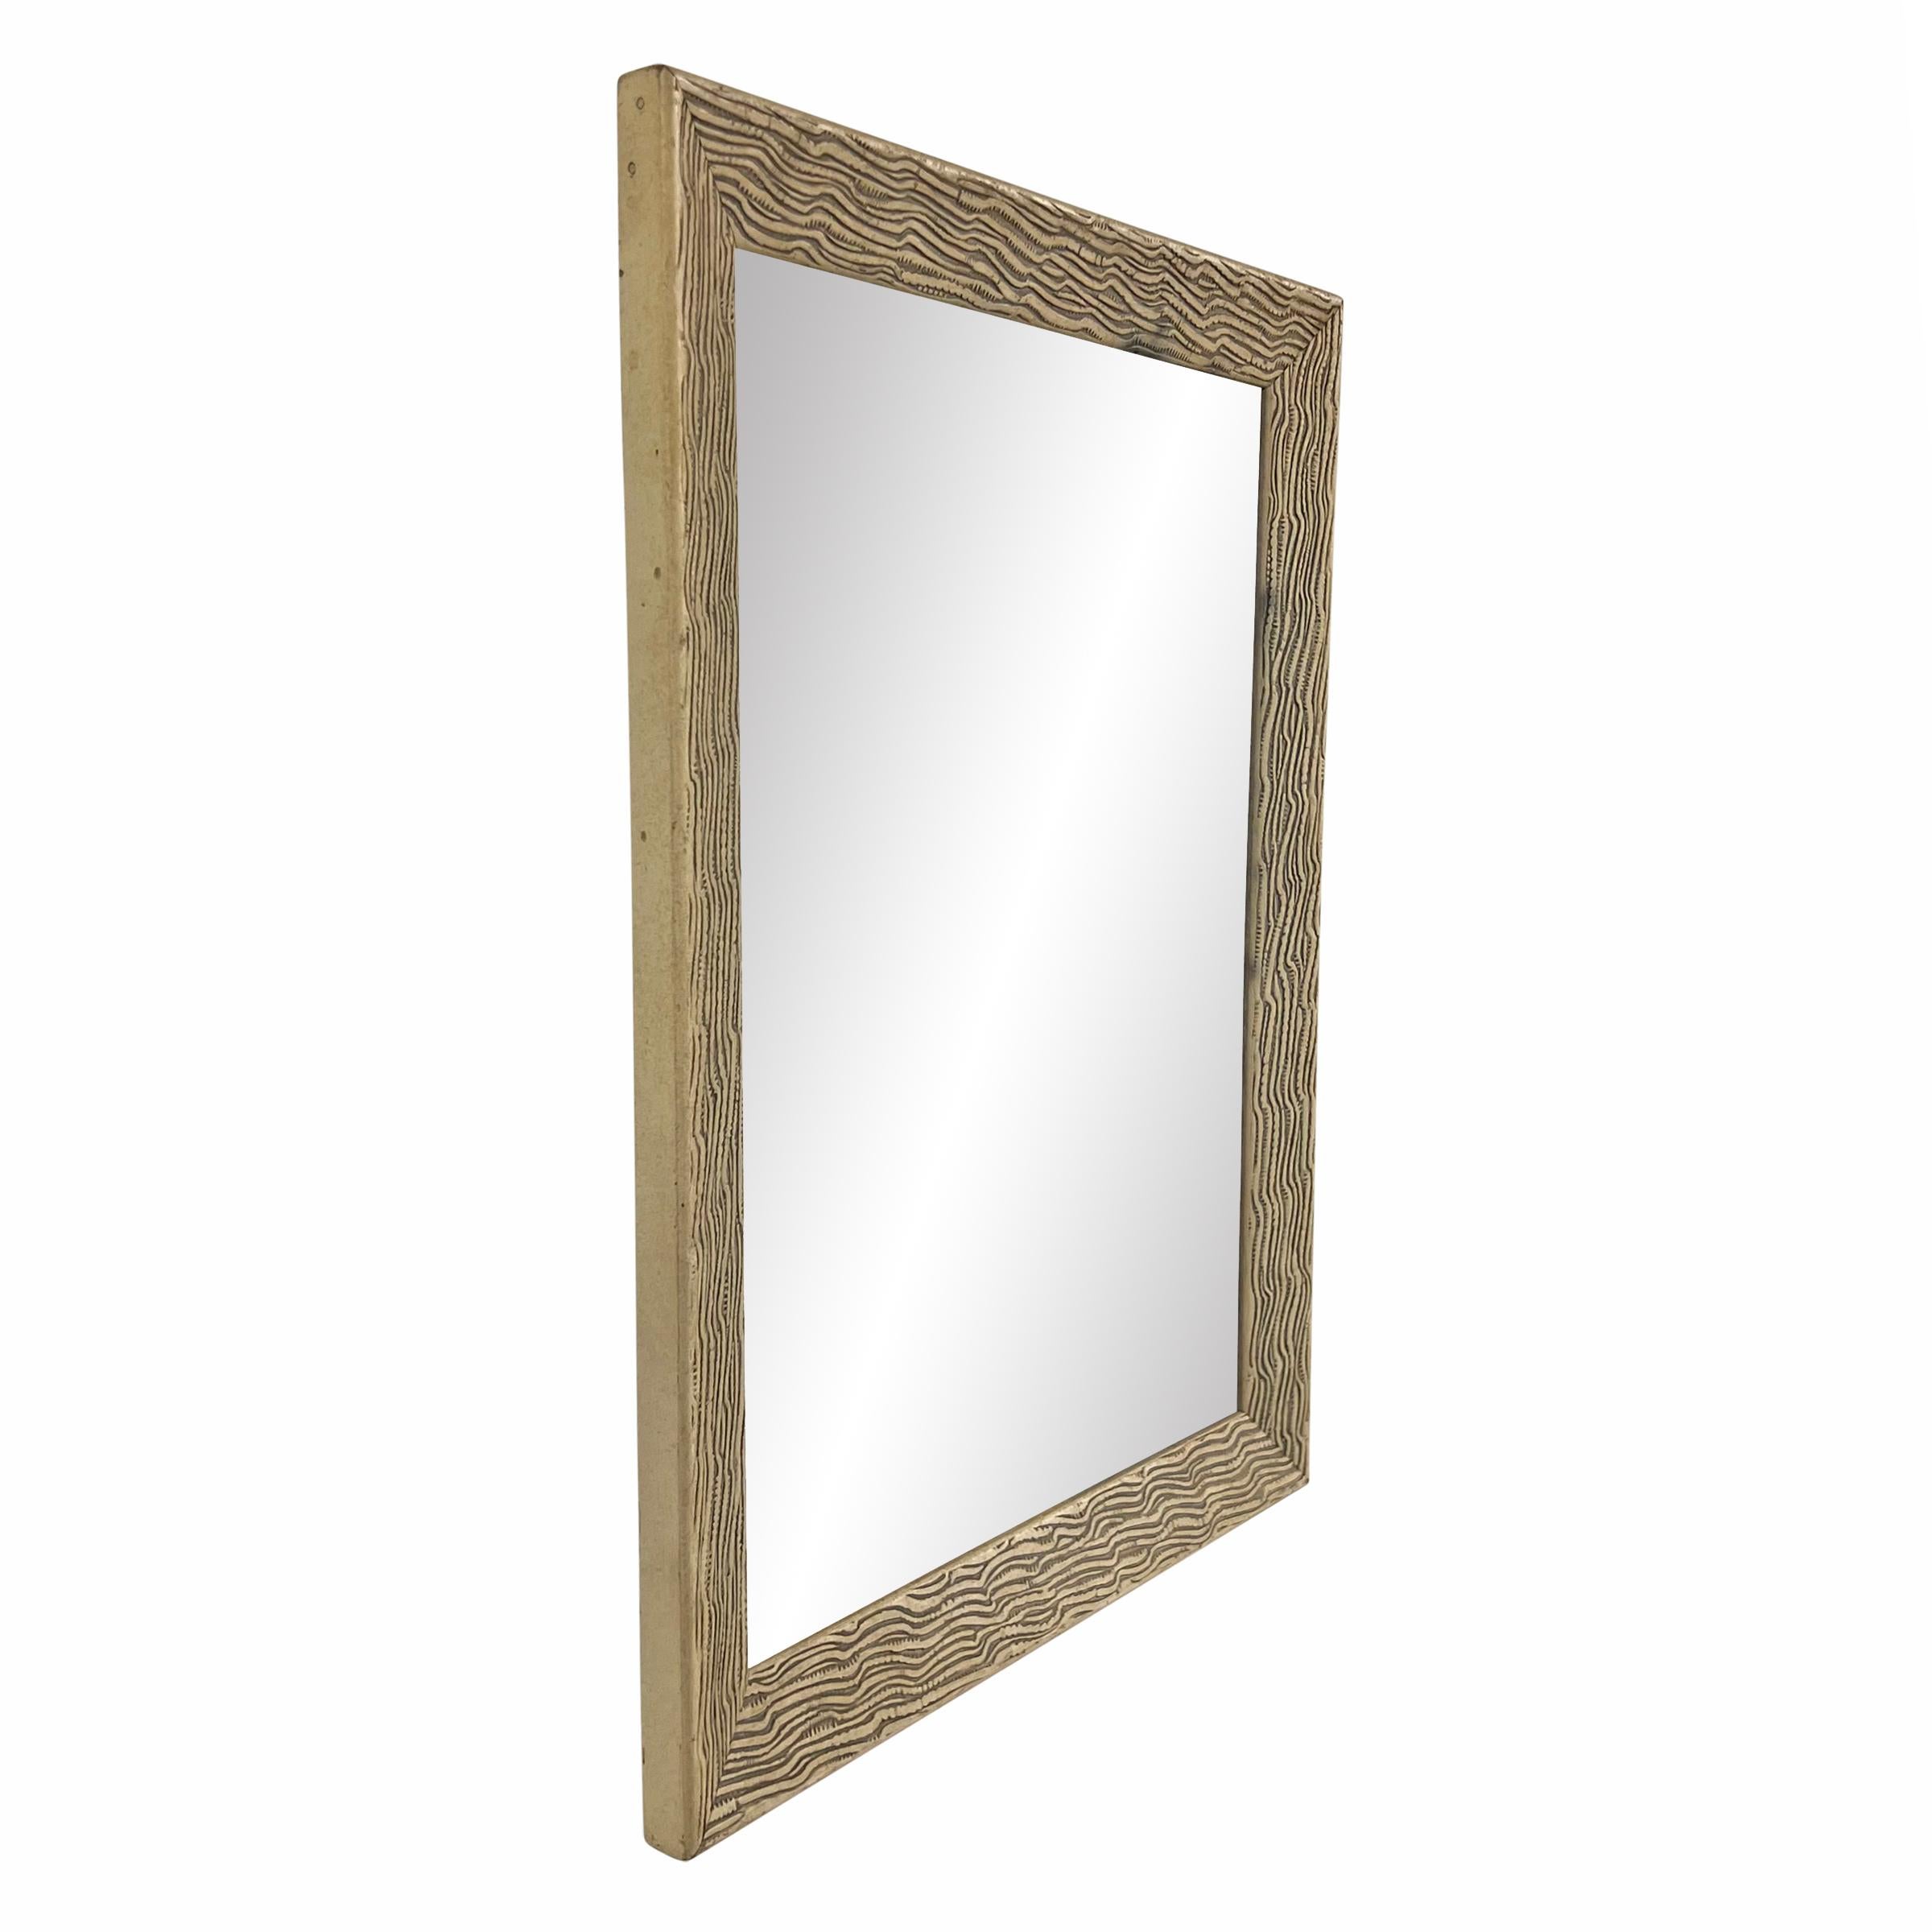 Modern MId-20th Century American Faux Grained Mirror For Sale